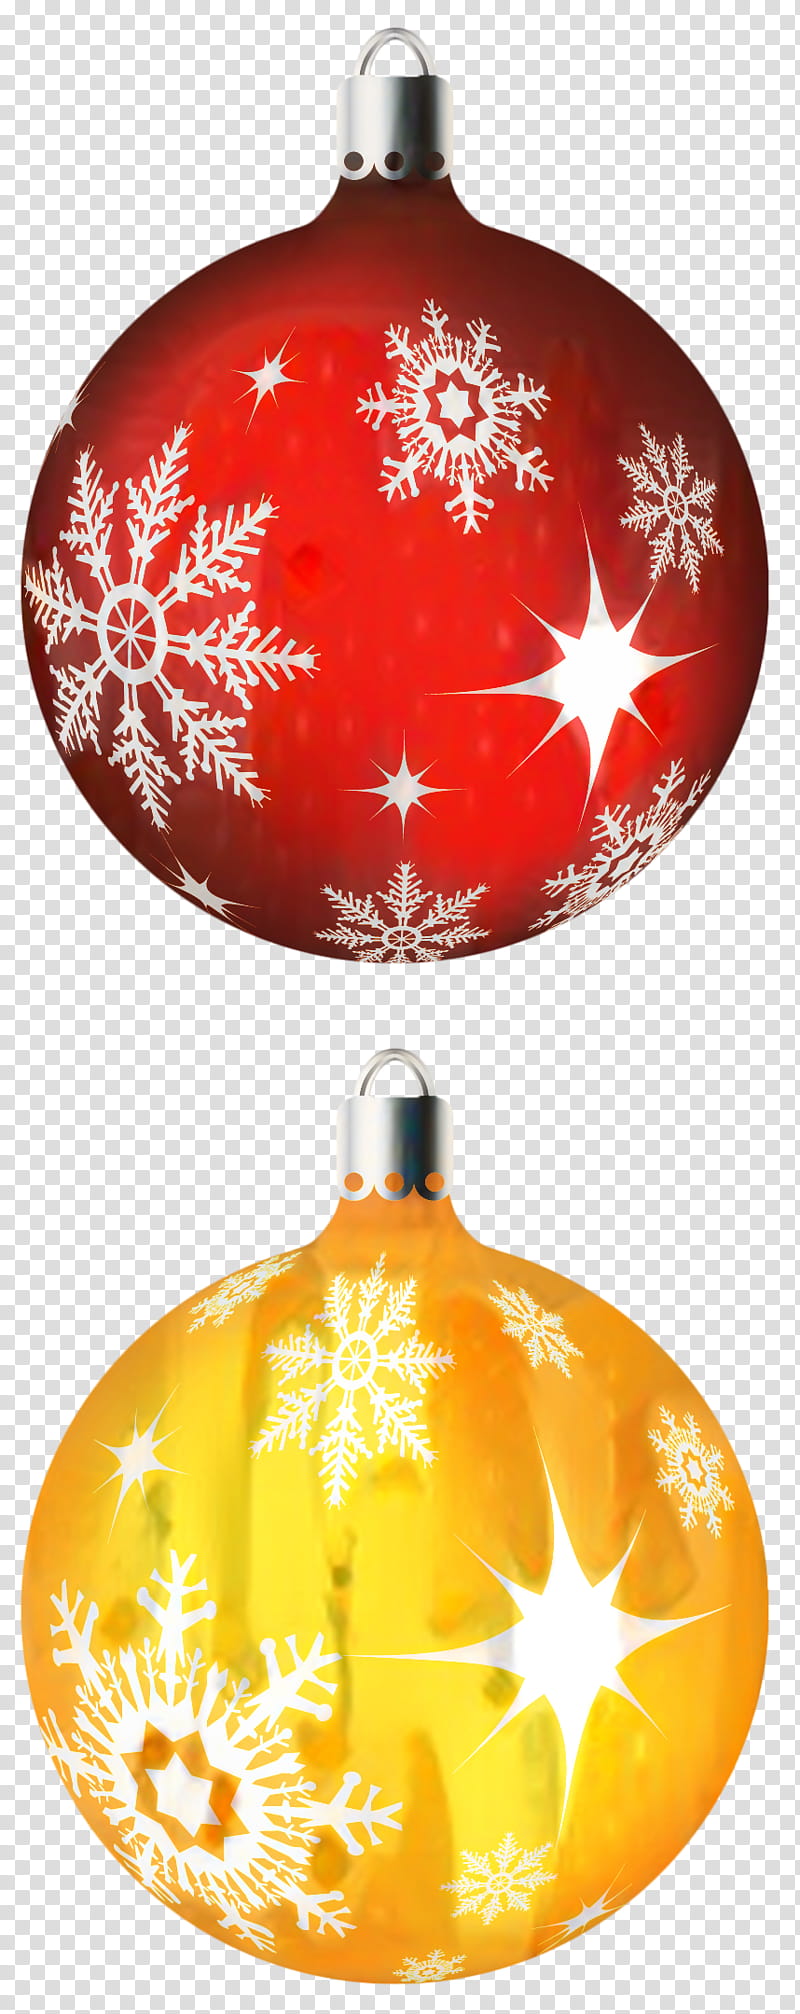 Christmas Tree Ball, Santa Claus, Christmas Ornament, Christmas Day, Christmas Decoration, Snowflake, BORDERS AND FRAMES, Orange transparent background PNG clipart